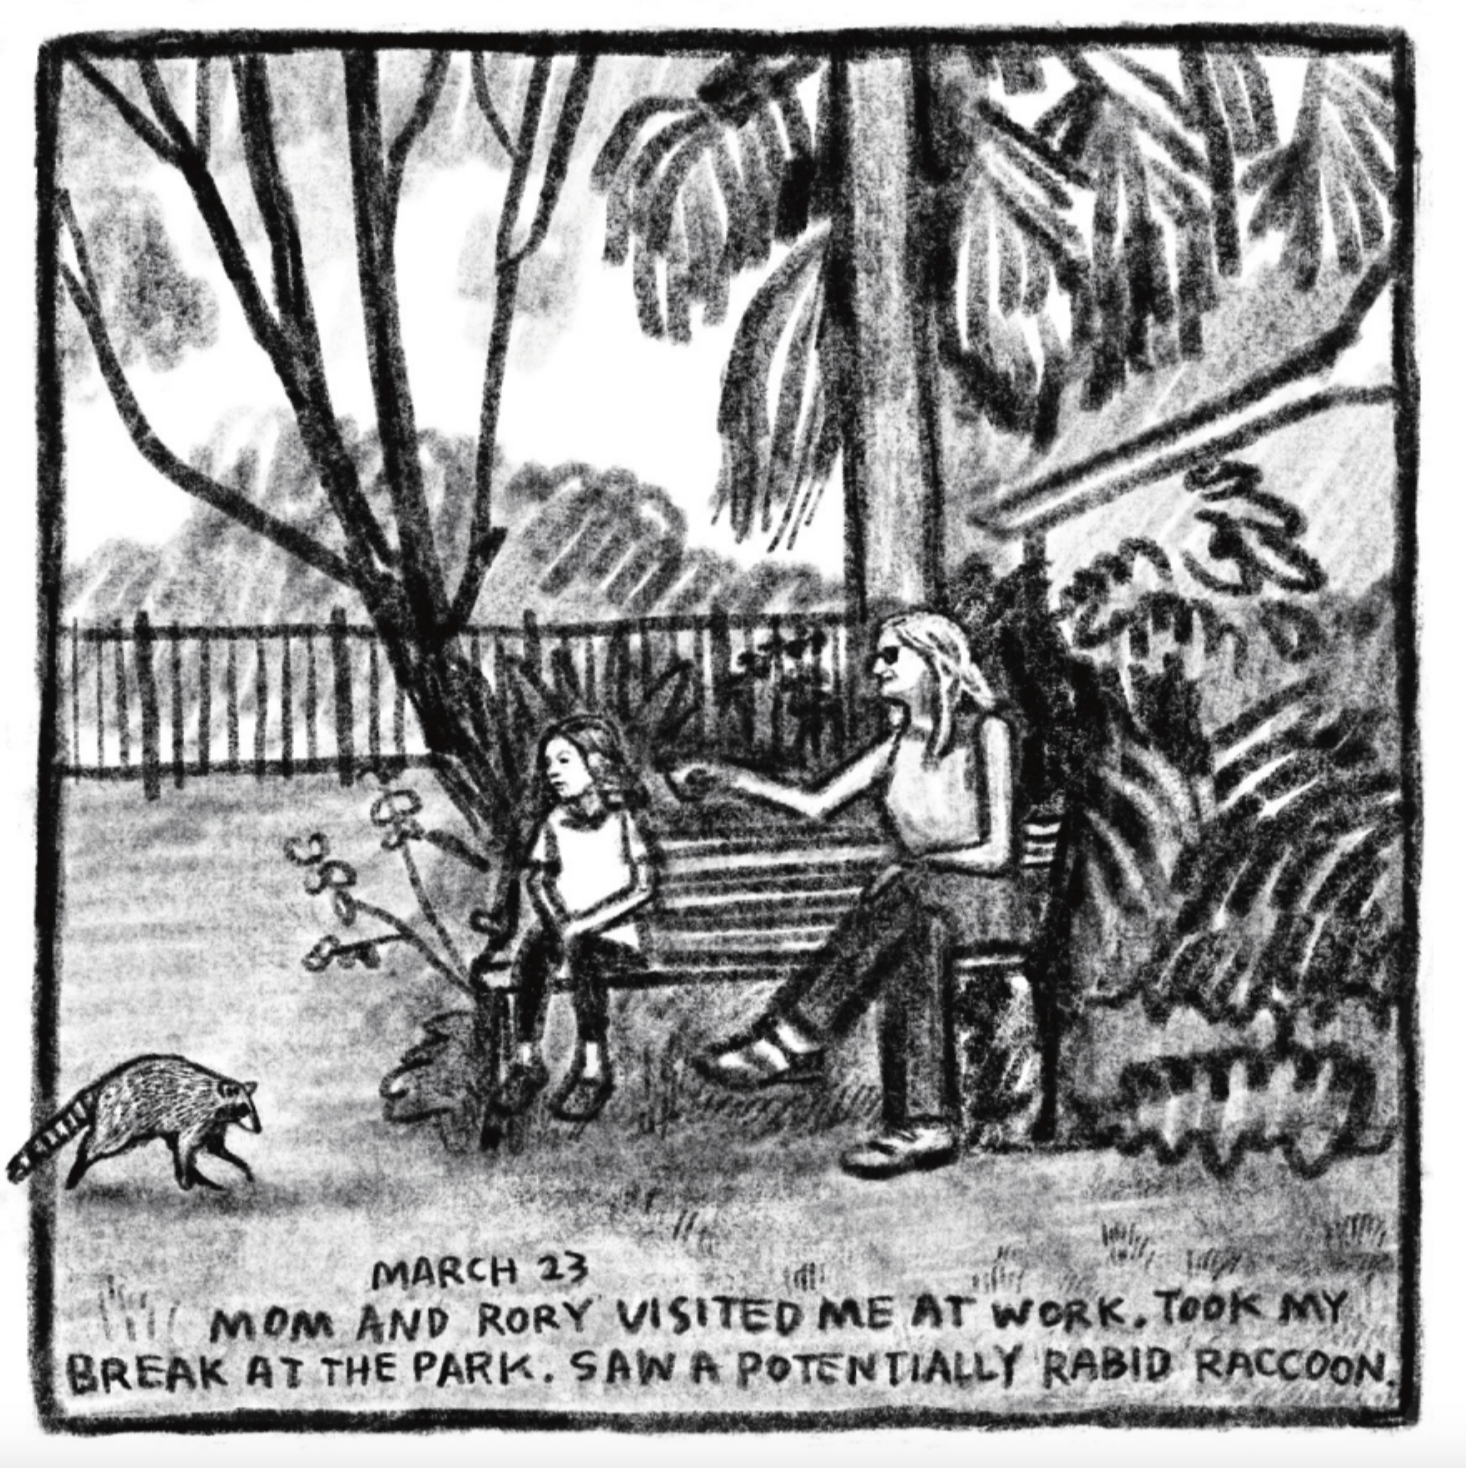 Kim and a young girl, perhaps Rory, sit on a bench surrounded by trees and foliage. A fence and the roof of a building are seen in the background. A raccoon walks into the panel, its tail crossing the border.

Description reads: March 23. Mom and Rory visited me at work. Took my break at the park. Saw a potentially rabid raccoon."